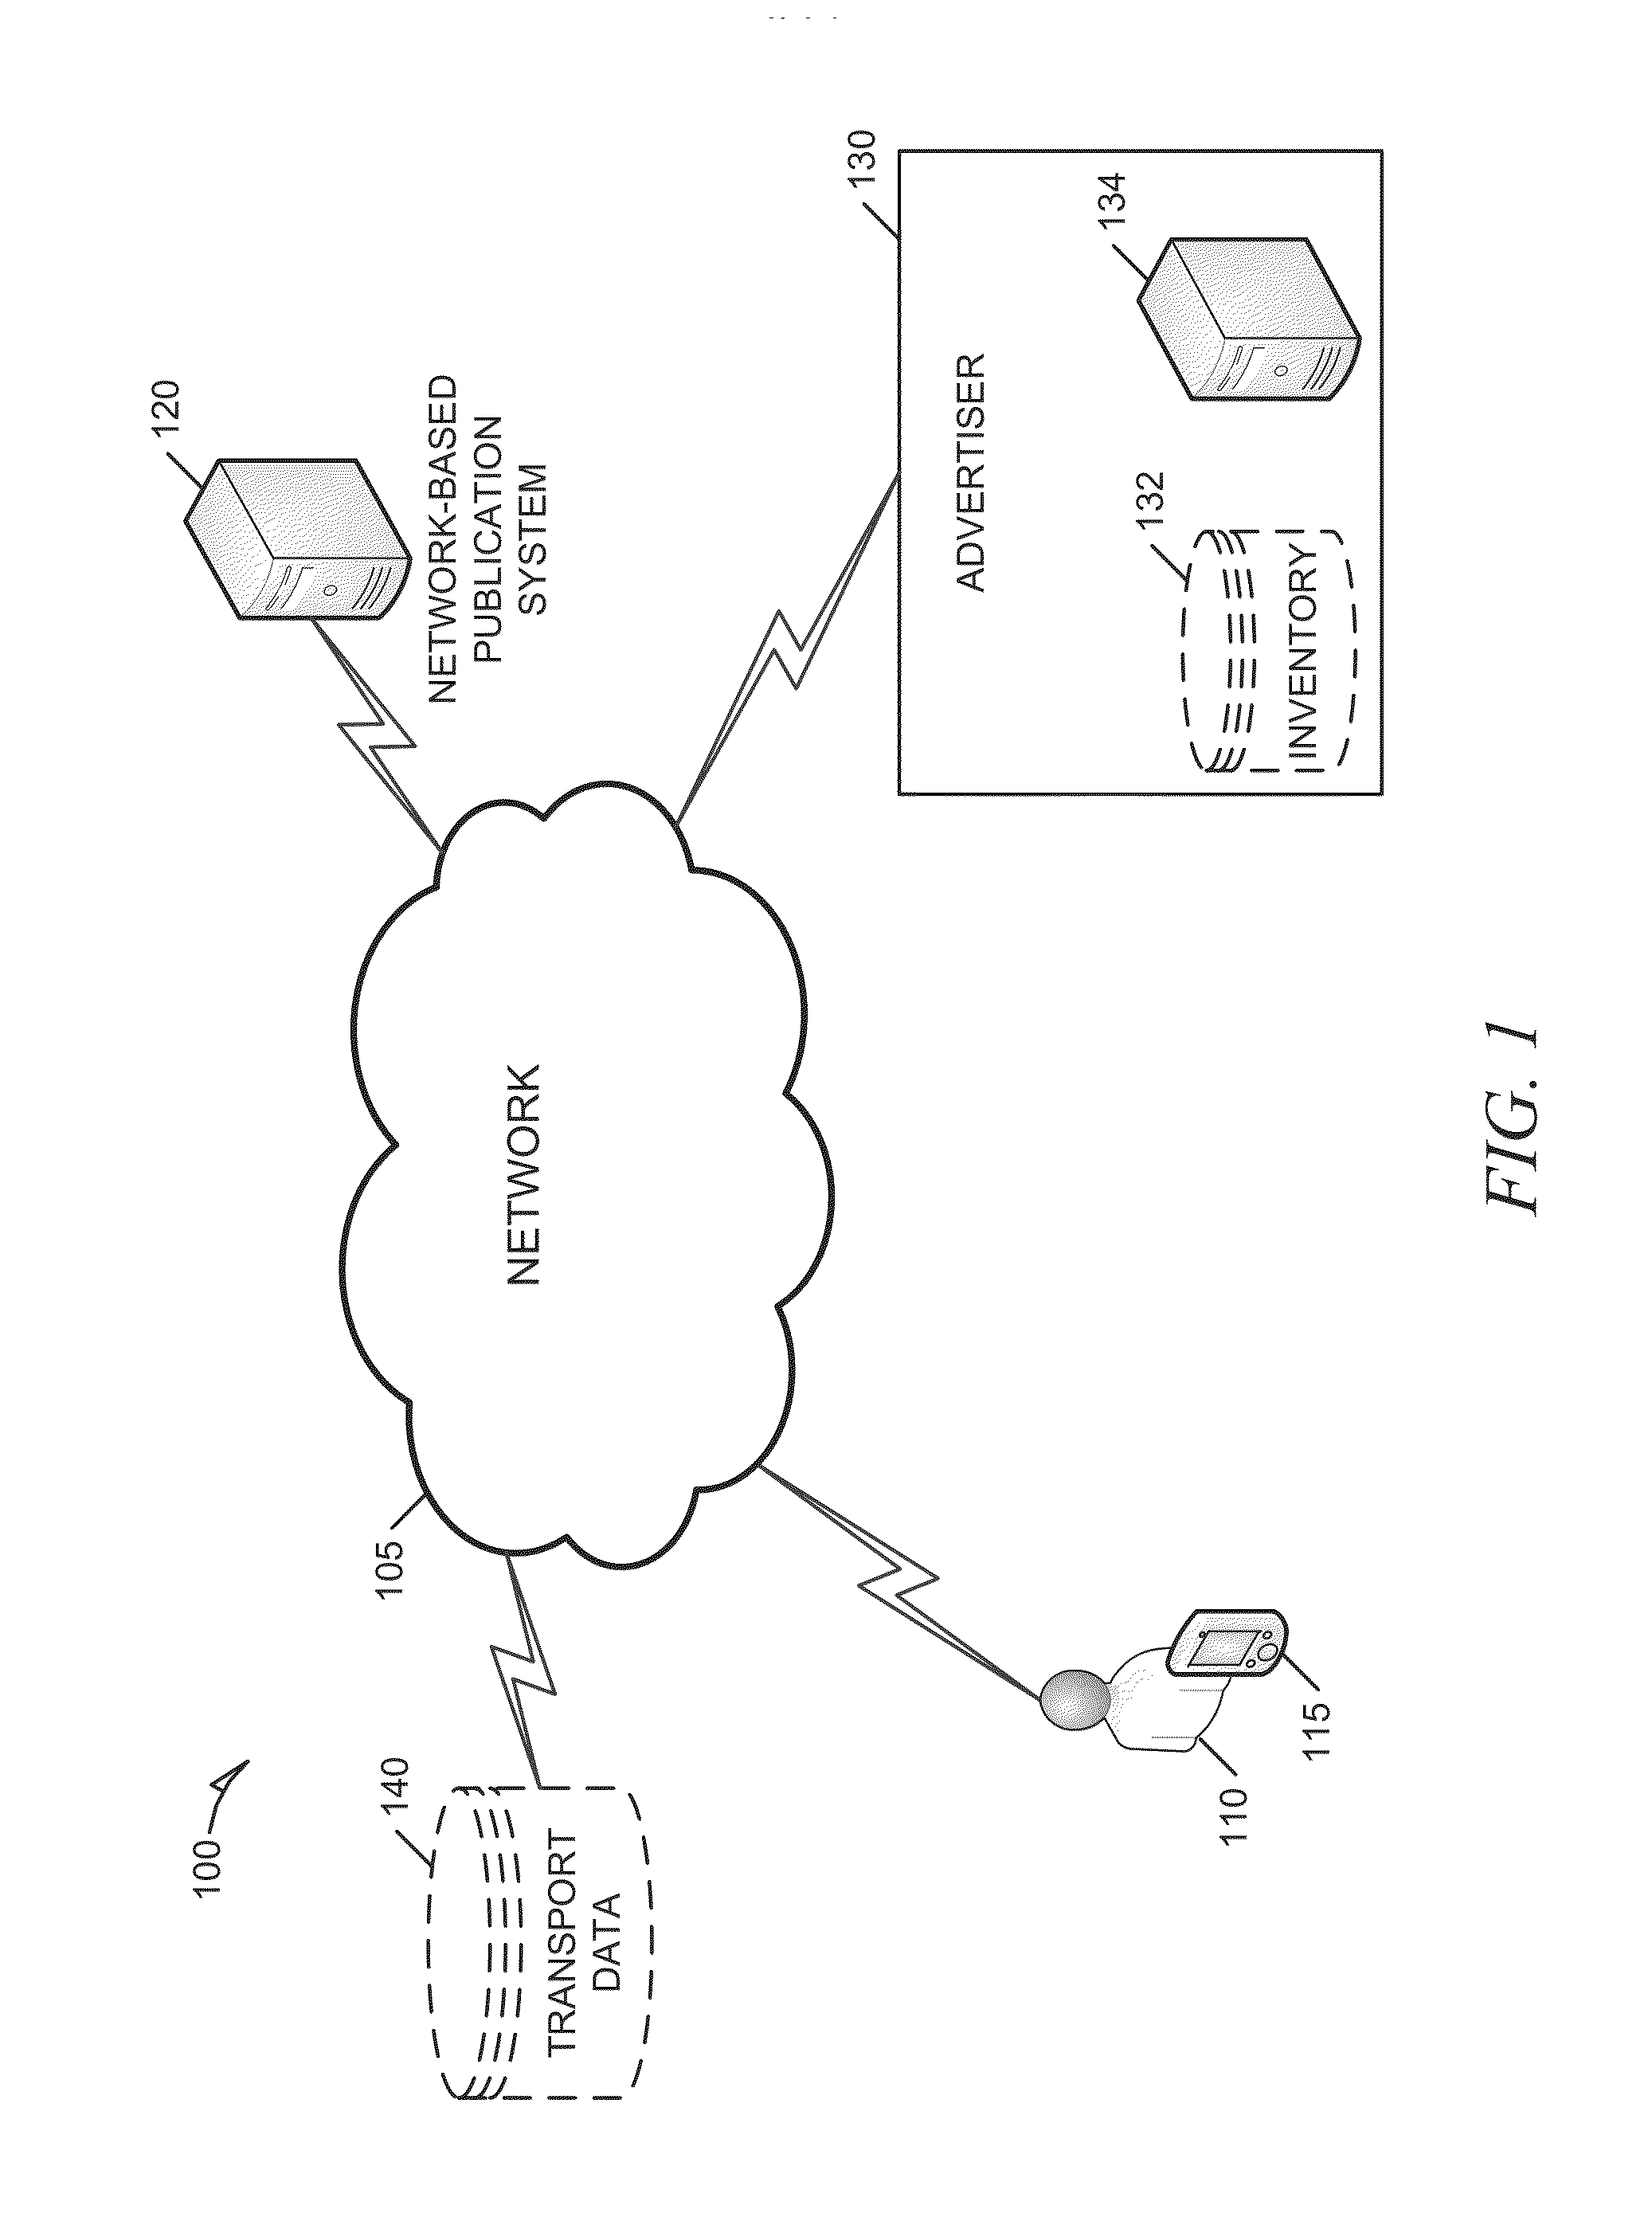 Systems and methods to provide transport aware geofences